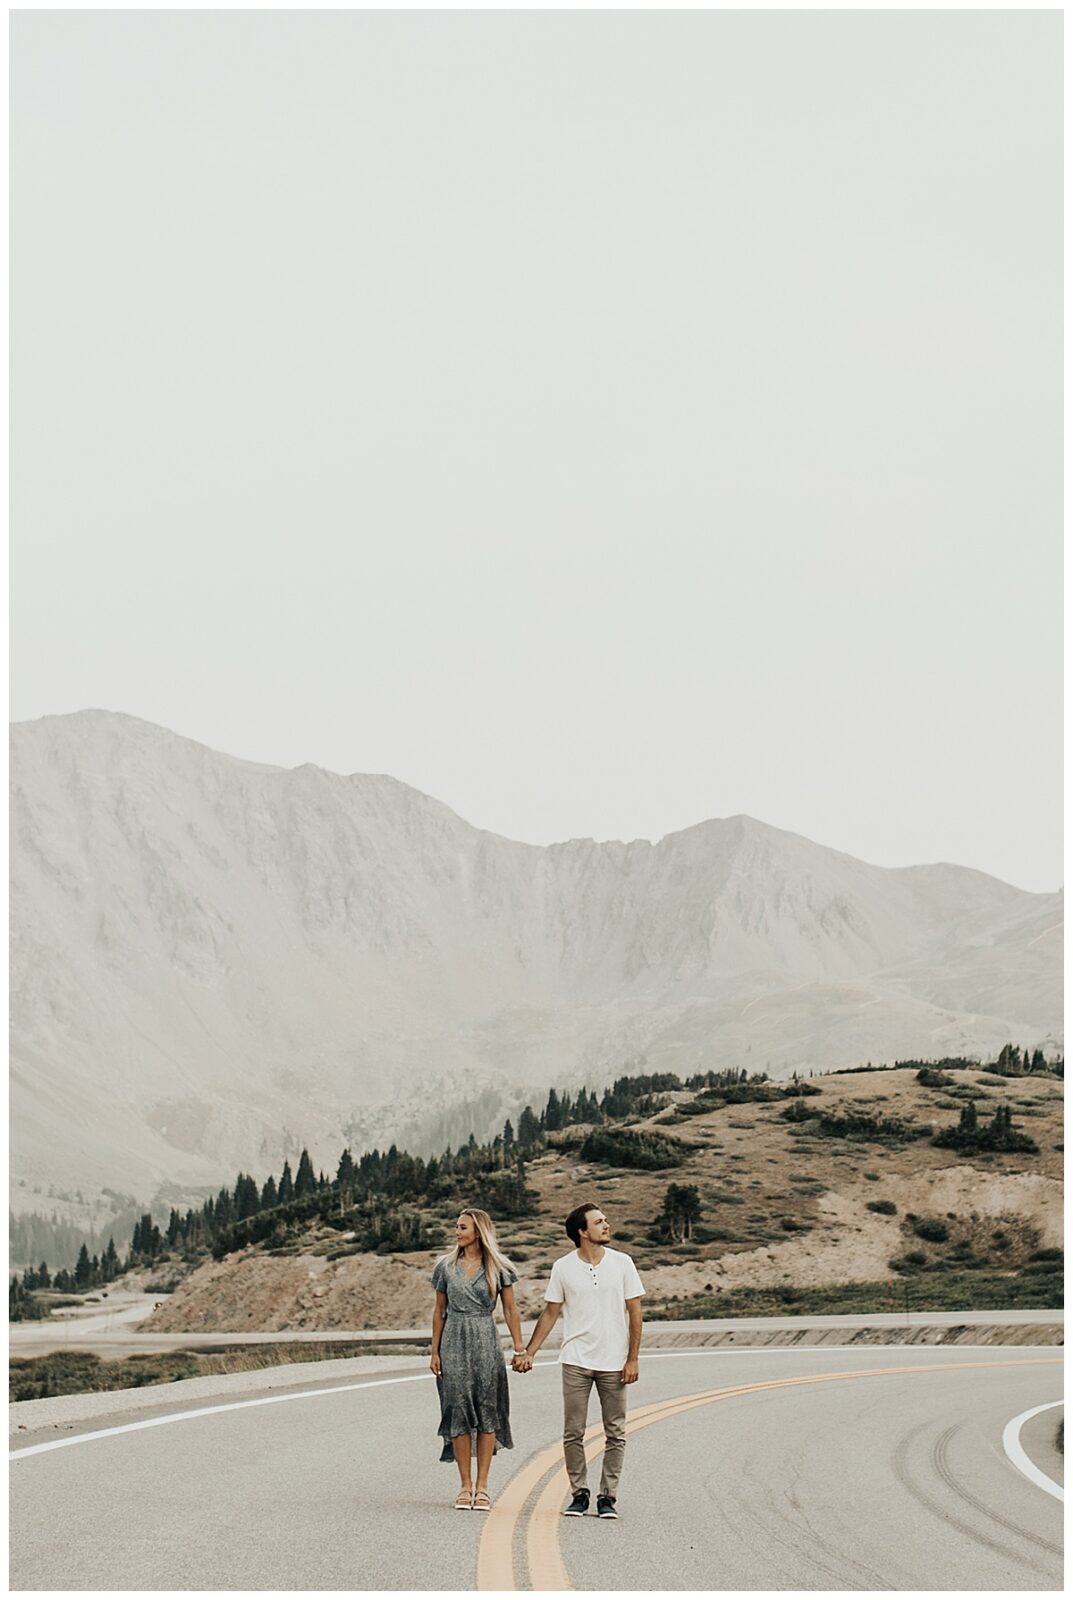 Engagement photoshoot at beautiful Loveland Pass in Colorado